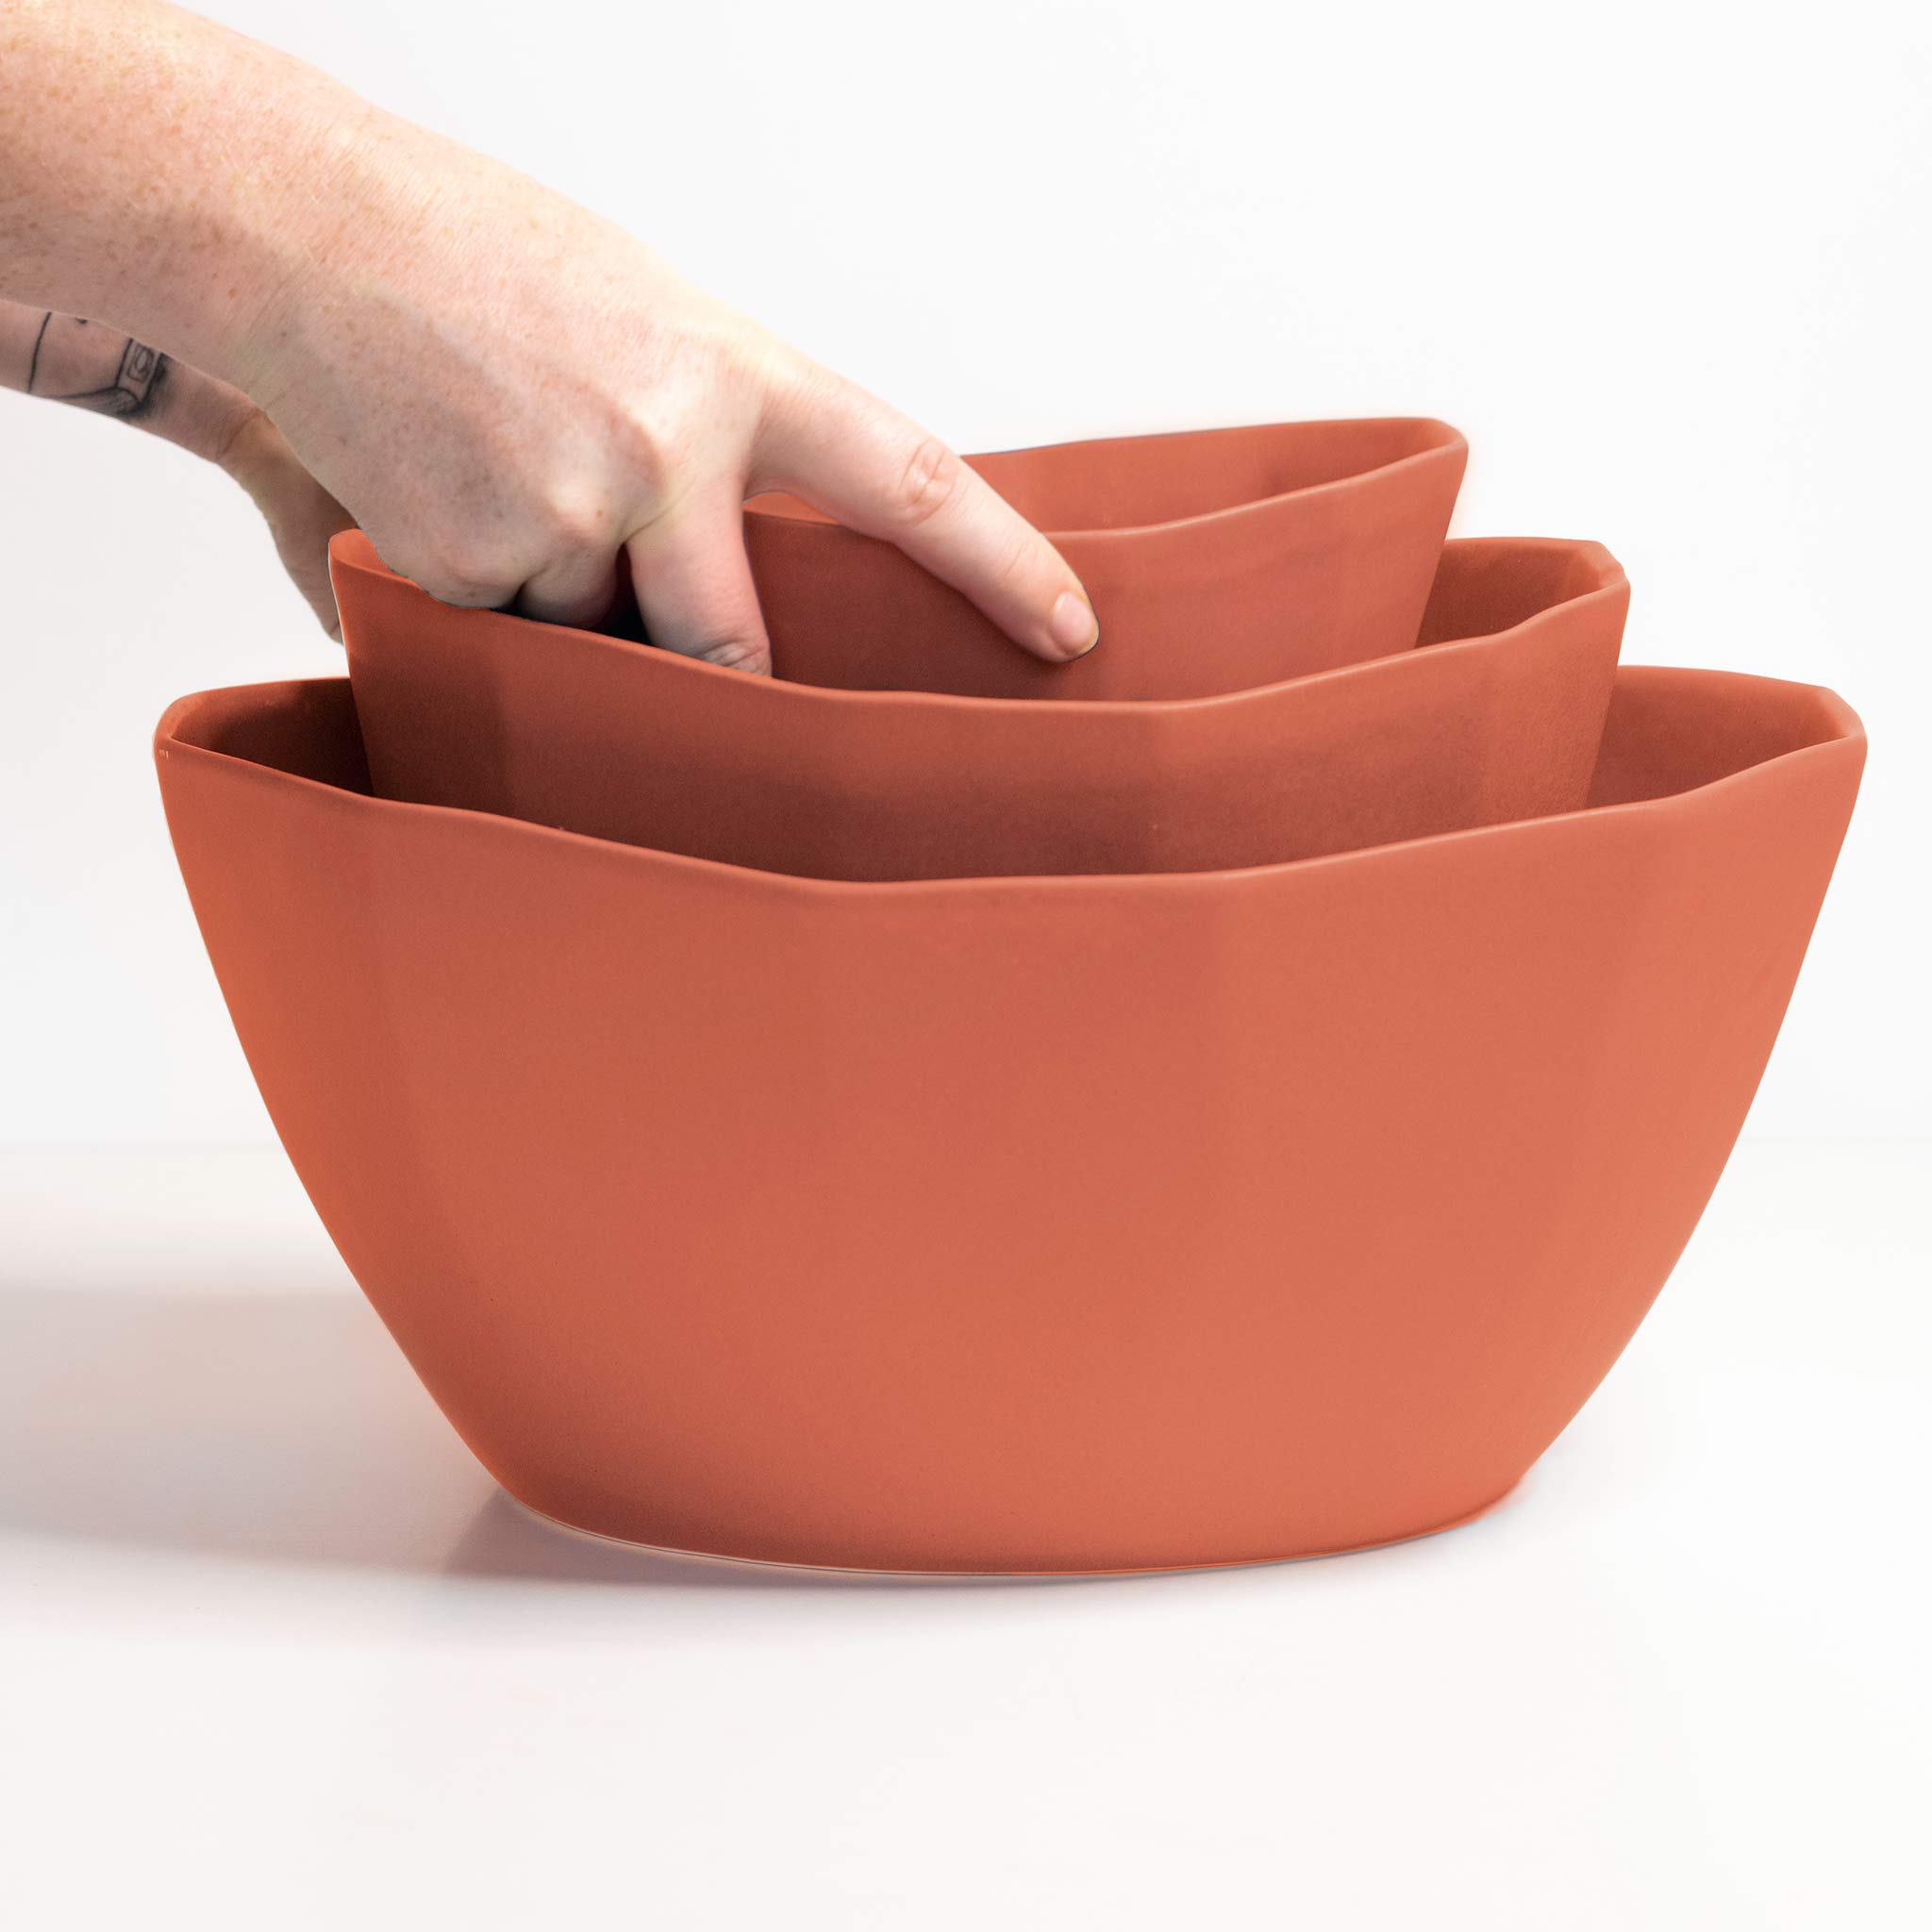 Porcelain Mixing and Nesting Bowl Set Terracotta Red The Bright Angle